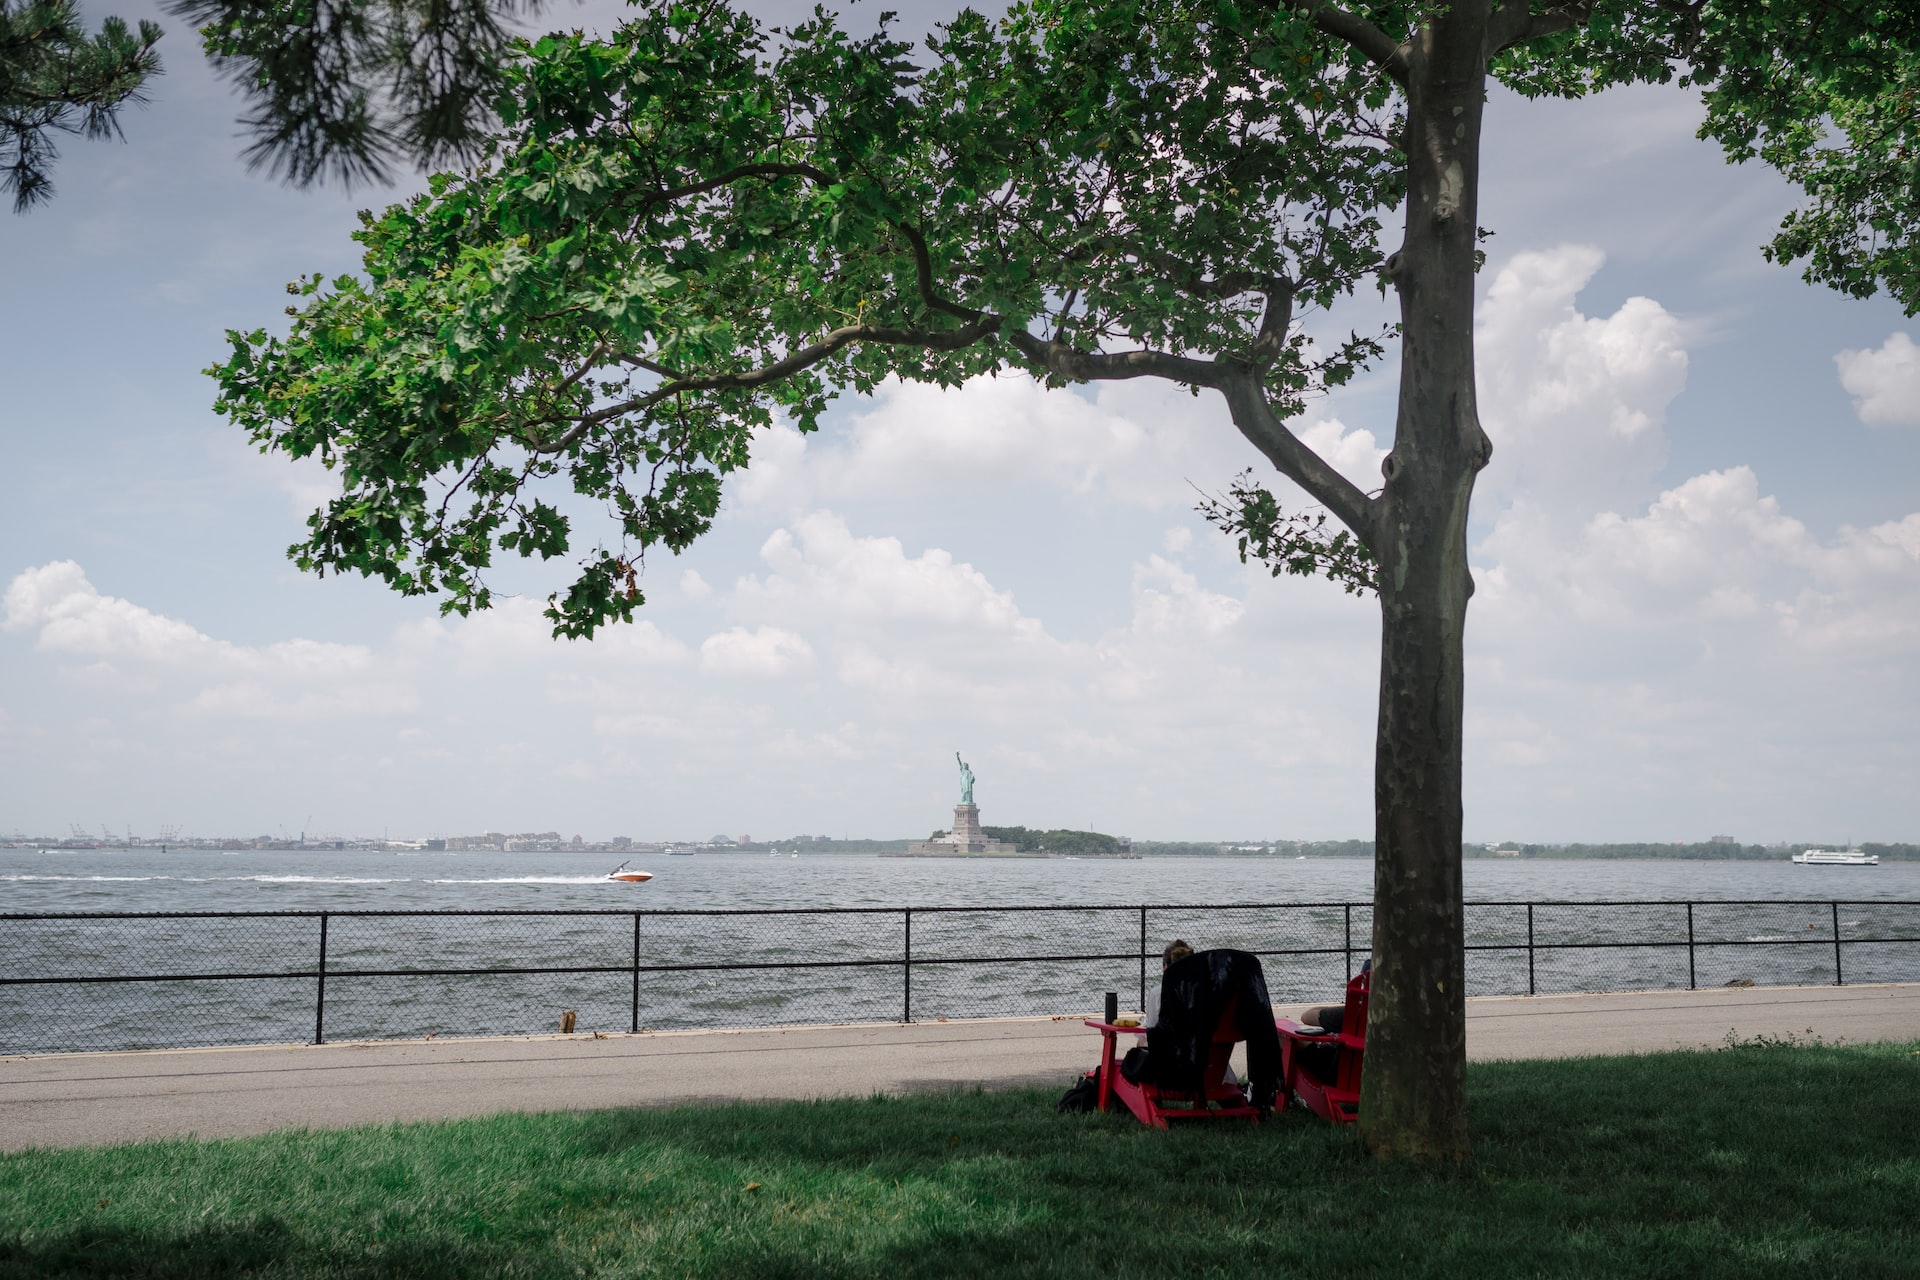 The view of Ellis Island and the Statue of Liberty from Governor's Island.